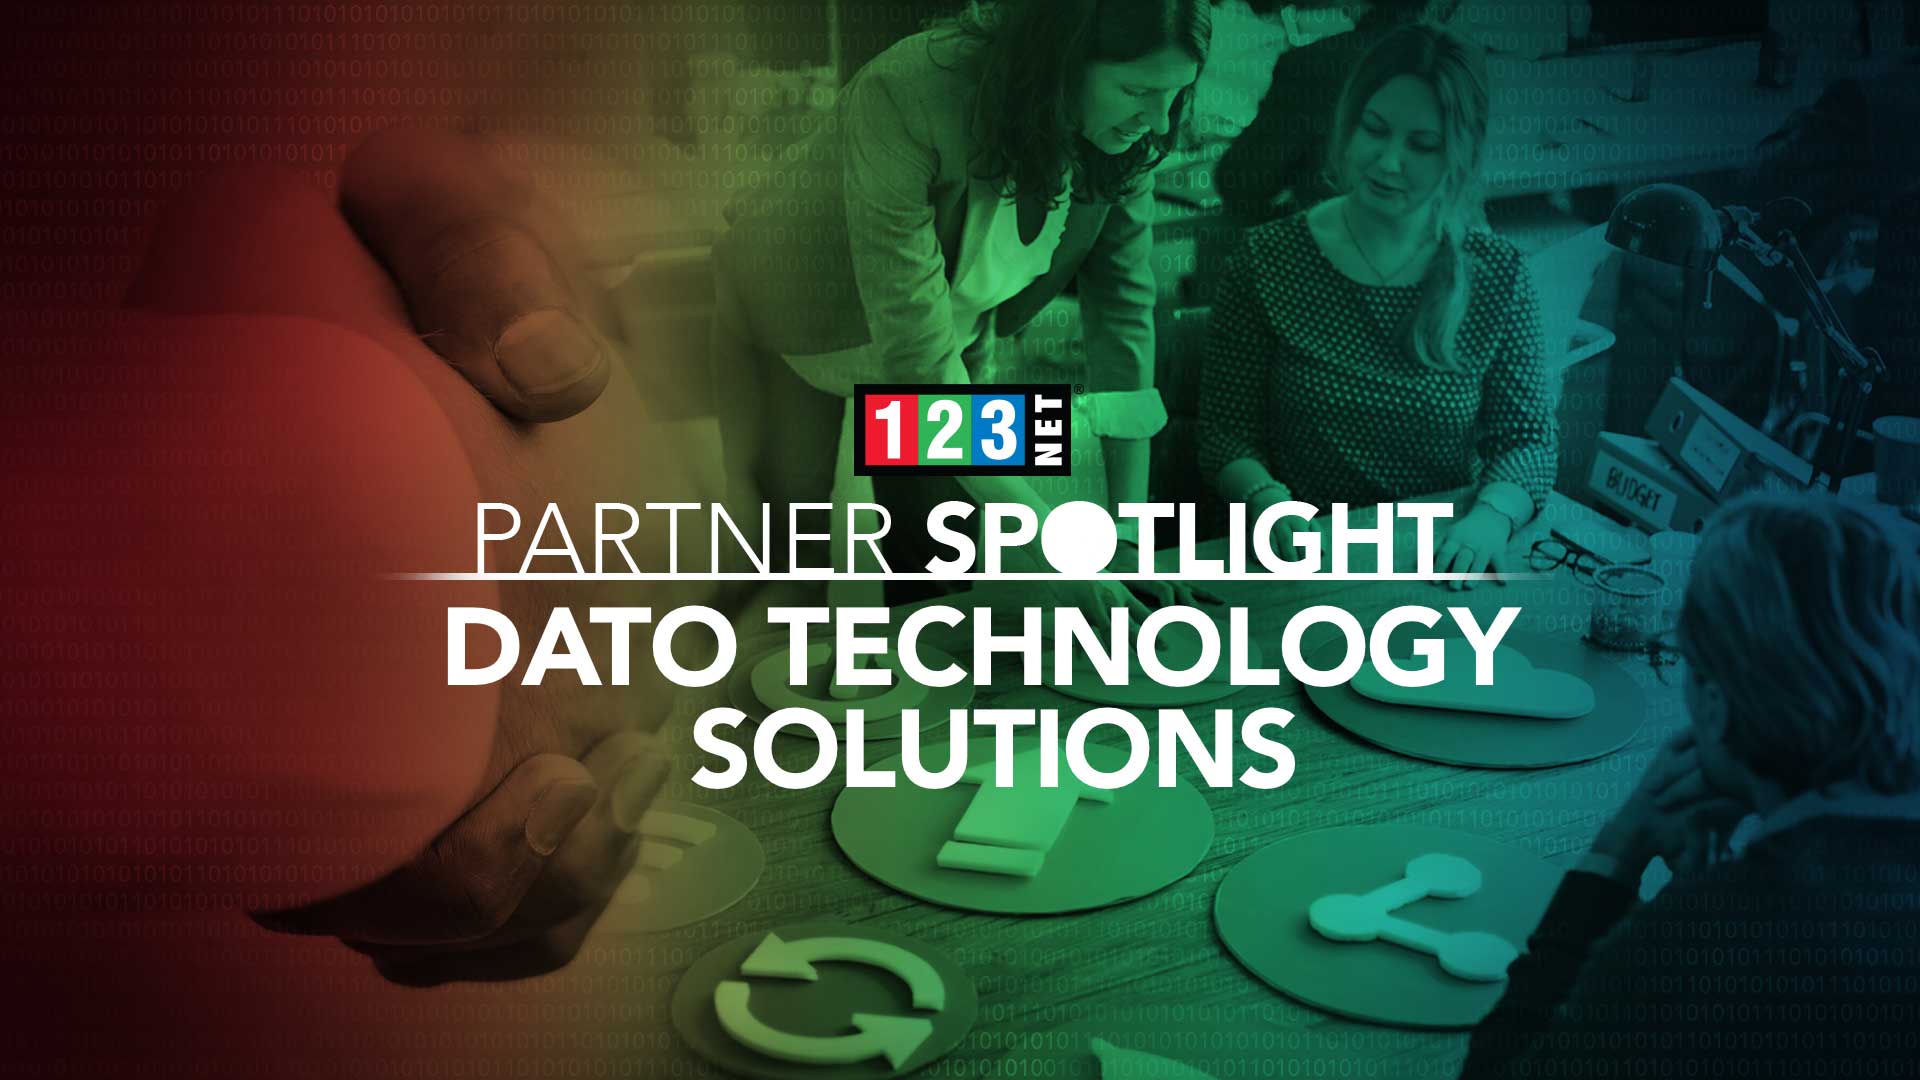 Dato technology solutions partners with 123NET title image